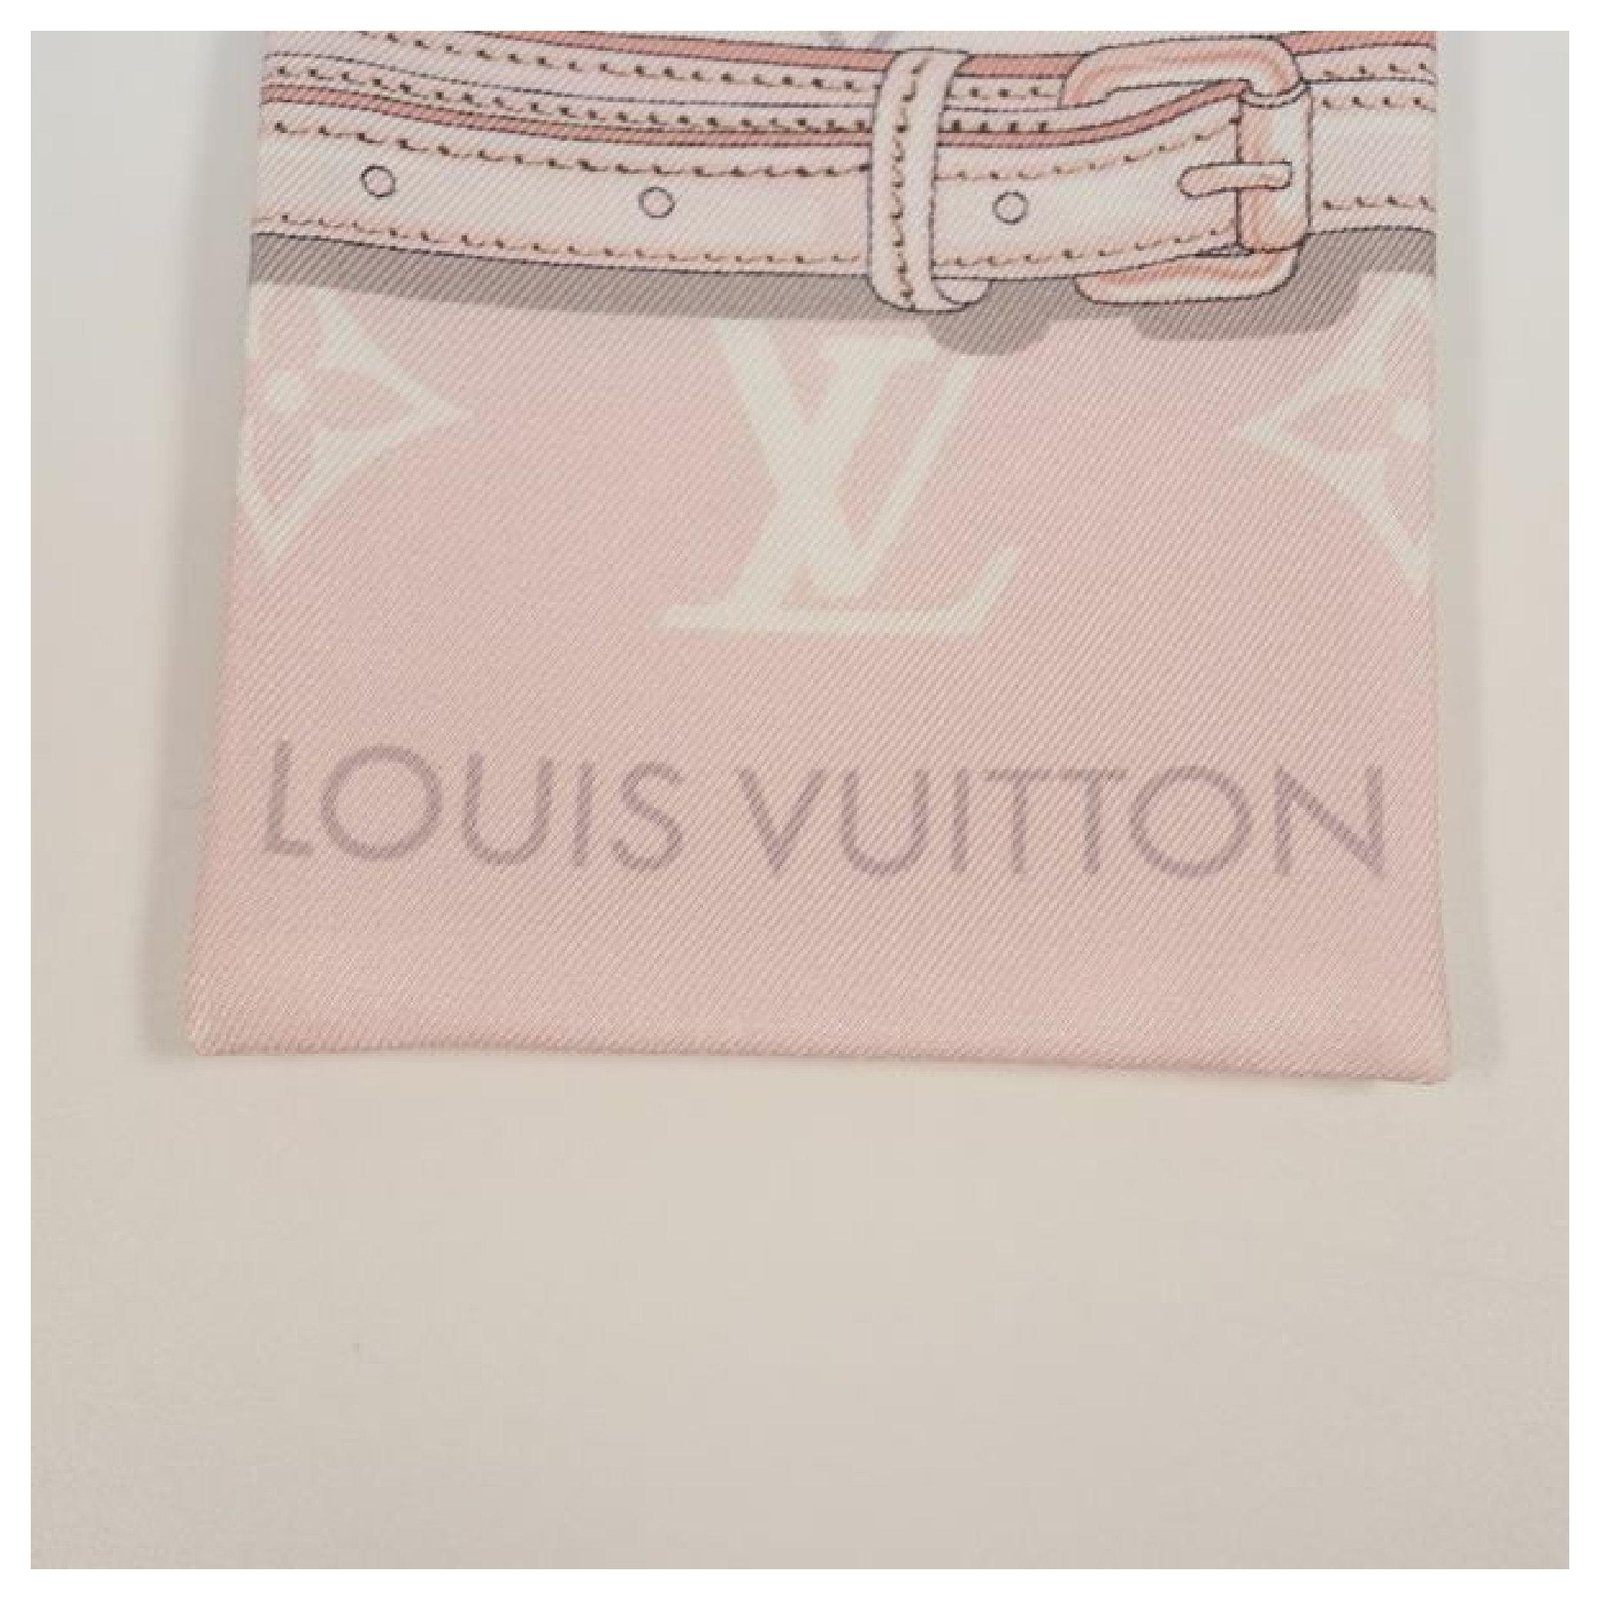 Louis Vuitton pink confidential twilly scarf – My Girlfriend's